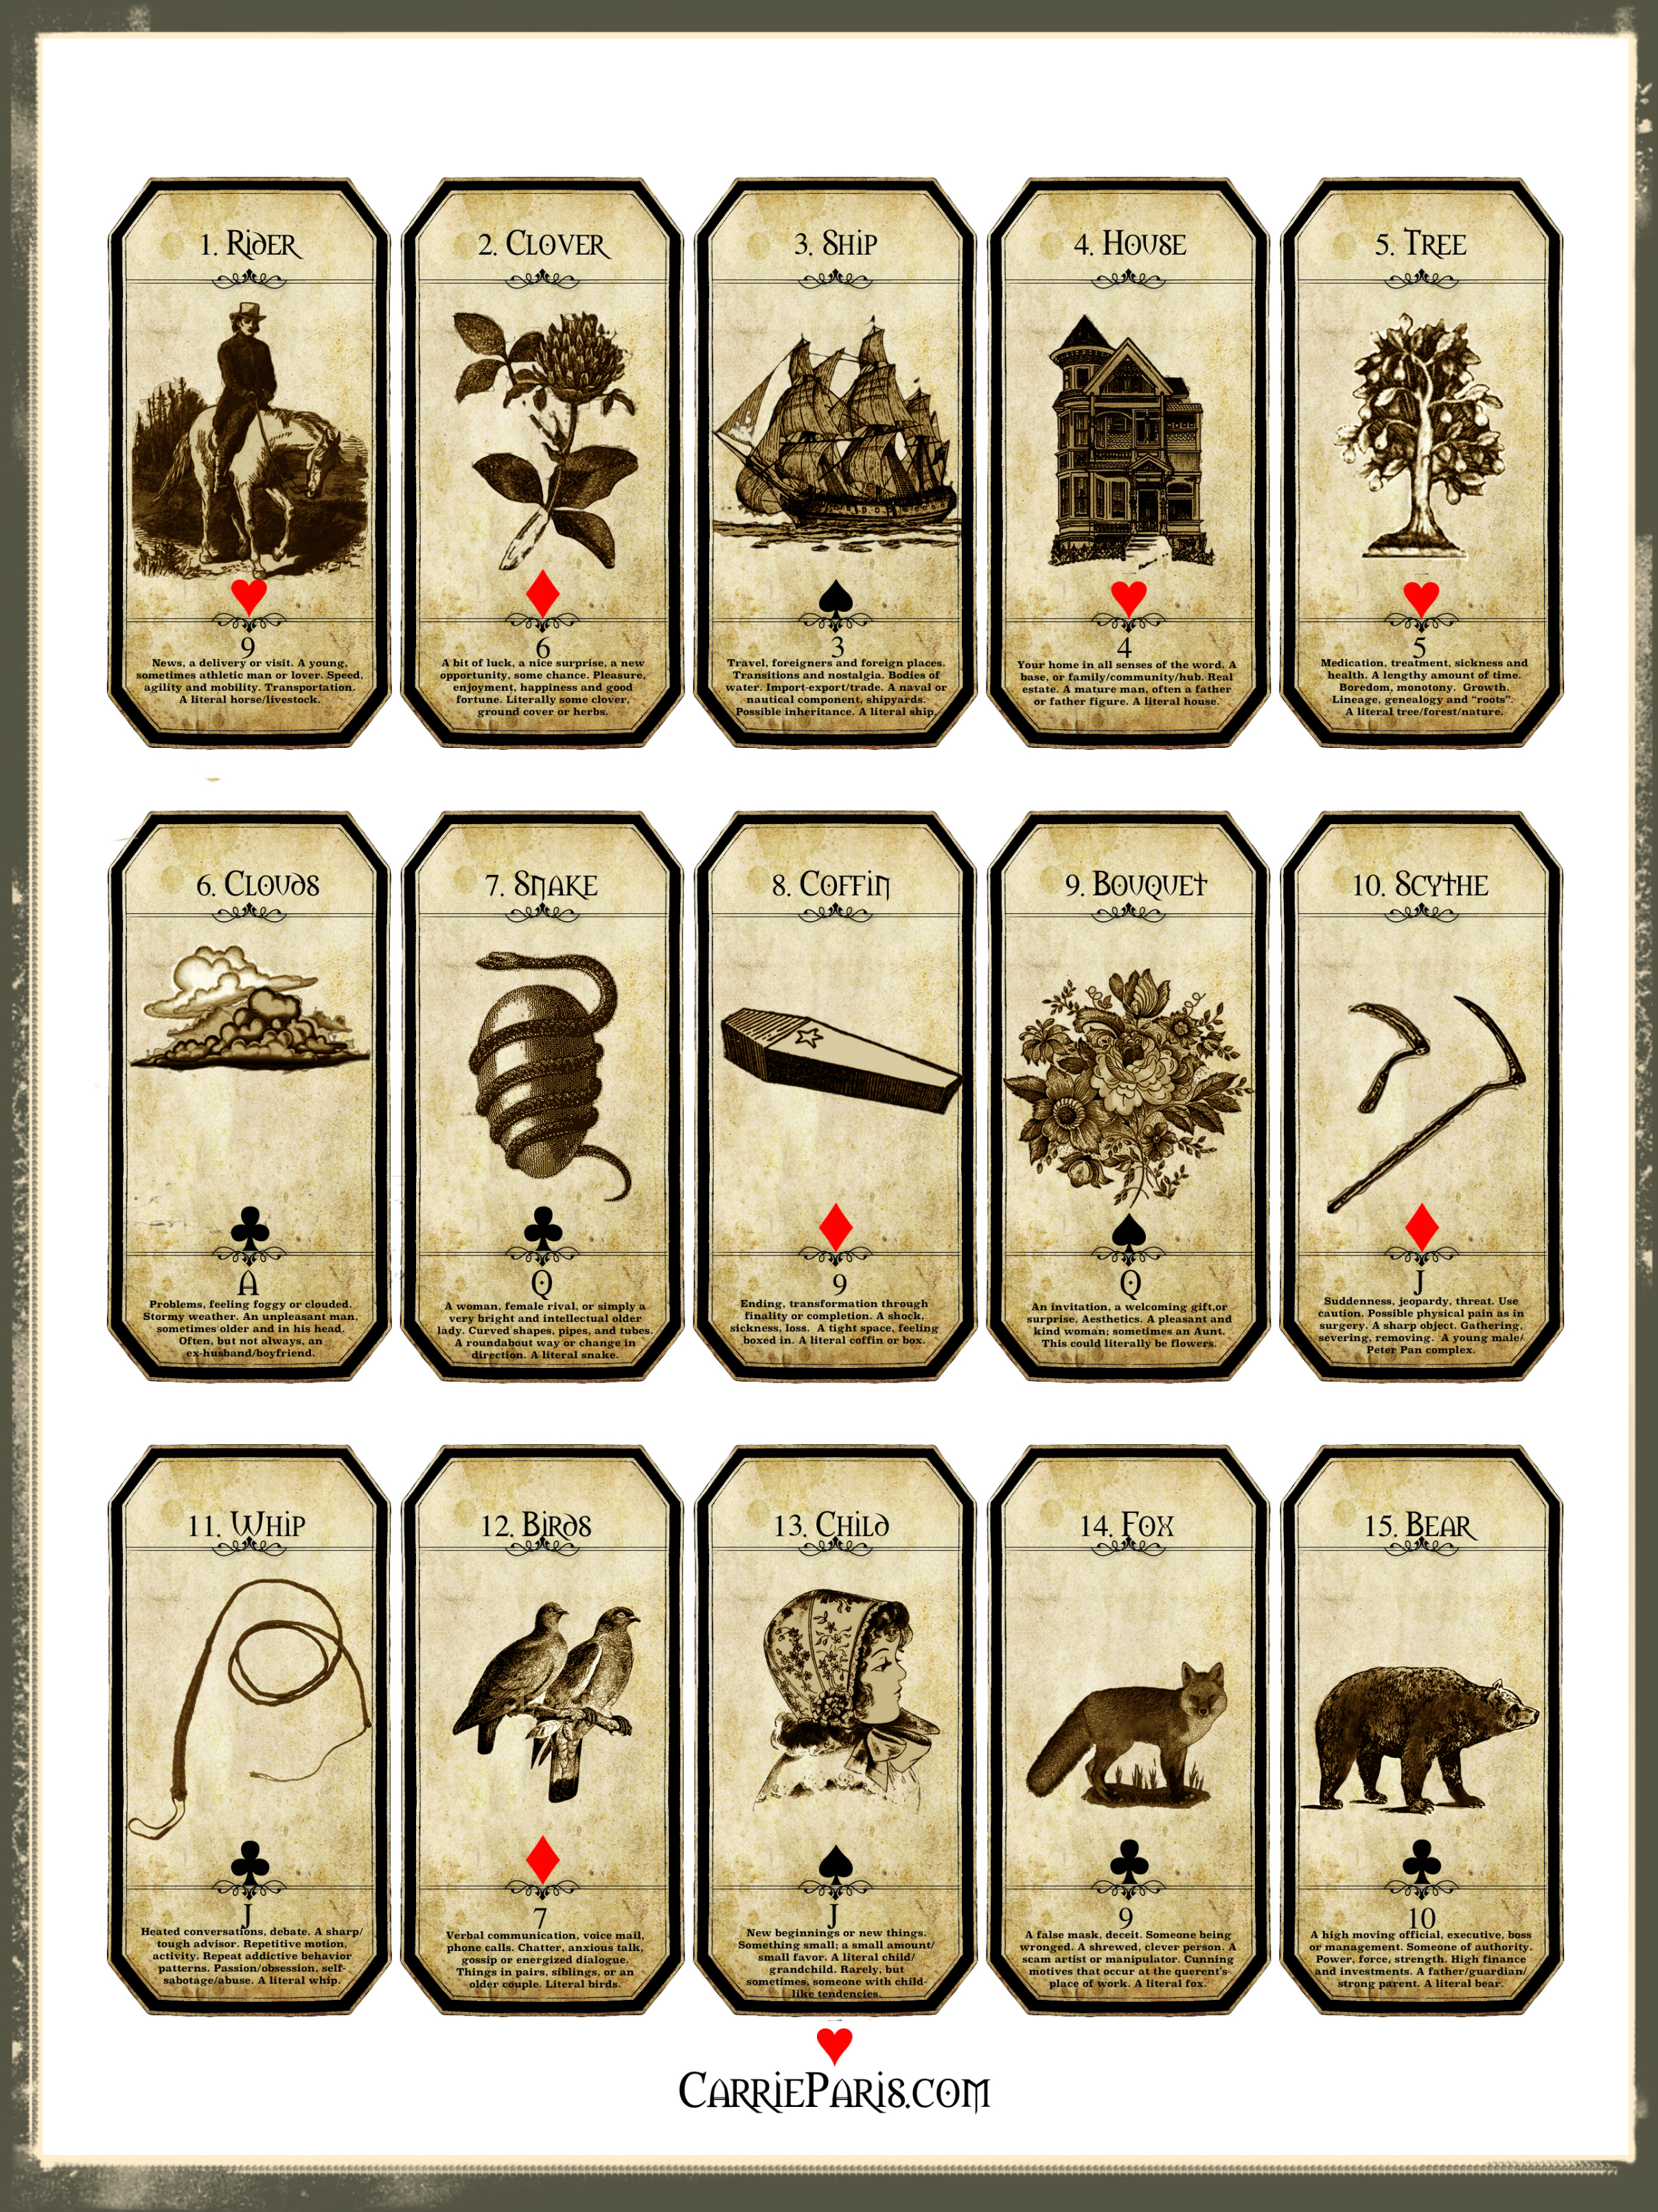 A Free Holiday Learning Deck - Carriepariscarrieparis - Printable Tarot Cards Pdf Free